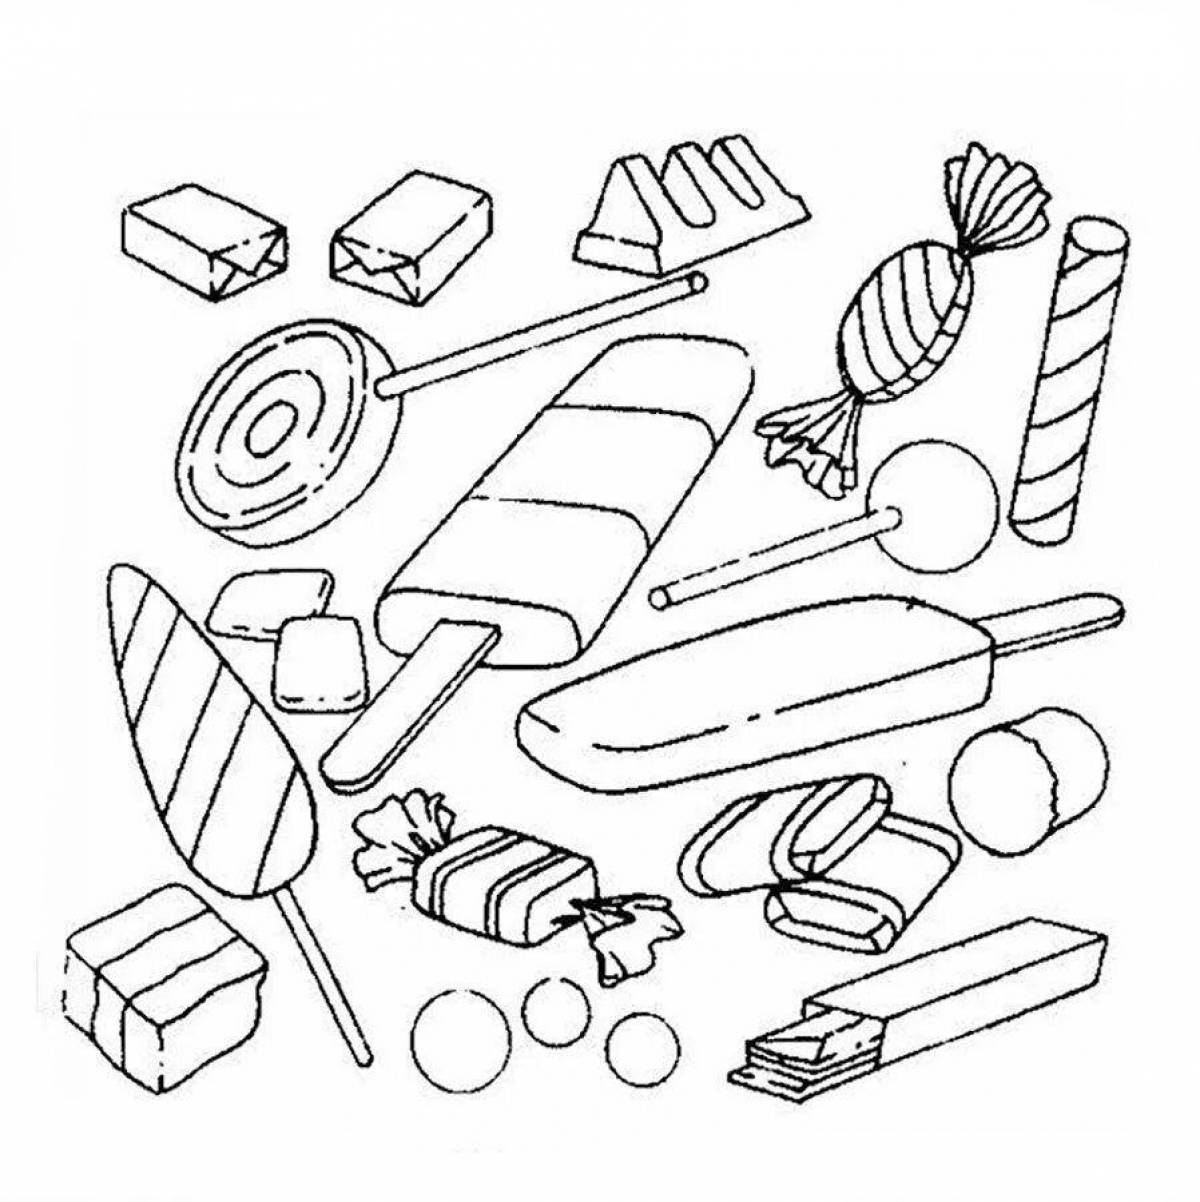 Coloring pages for kids